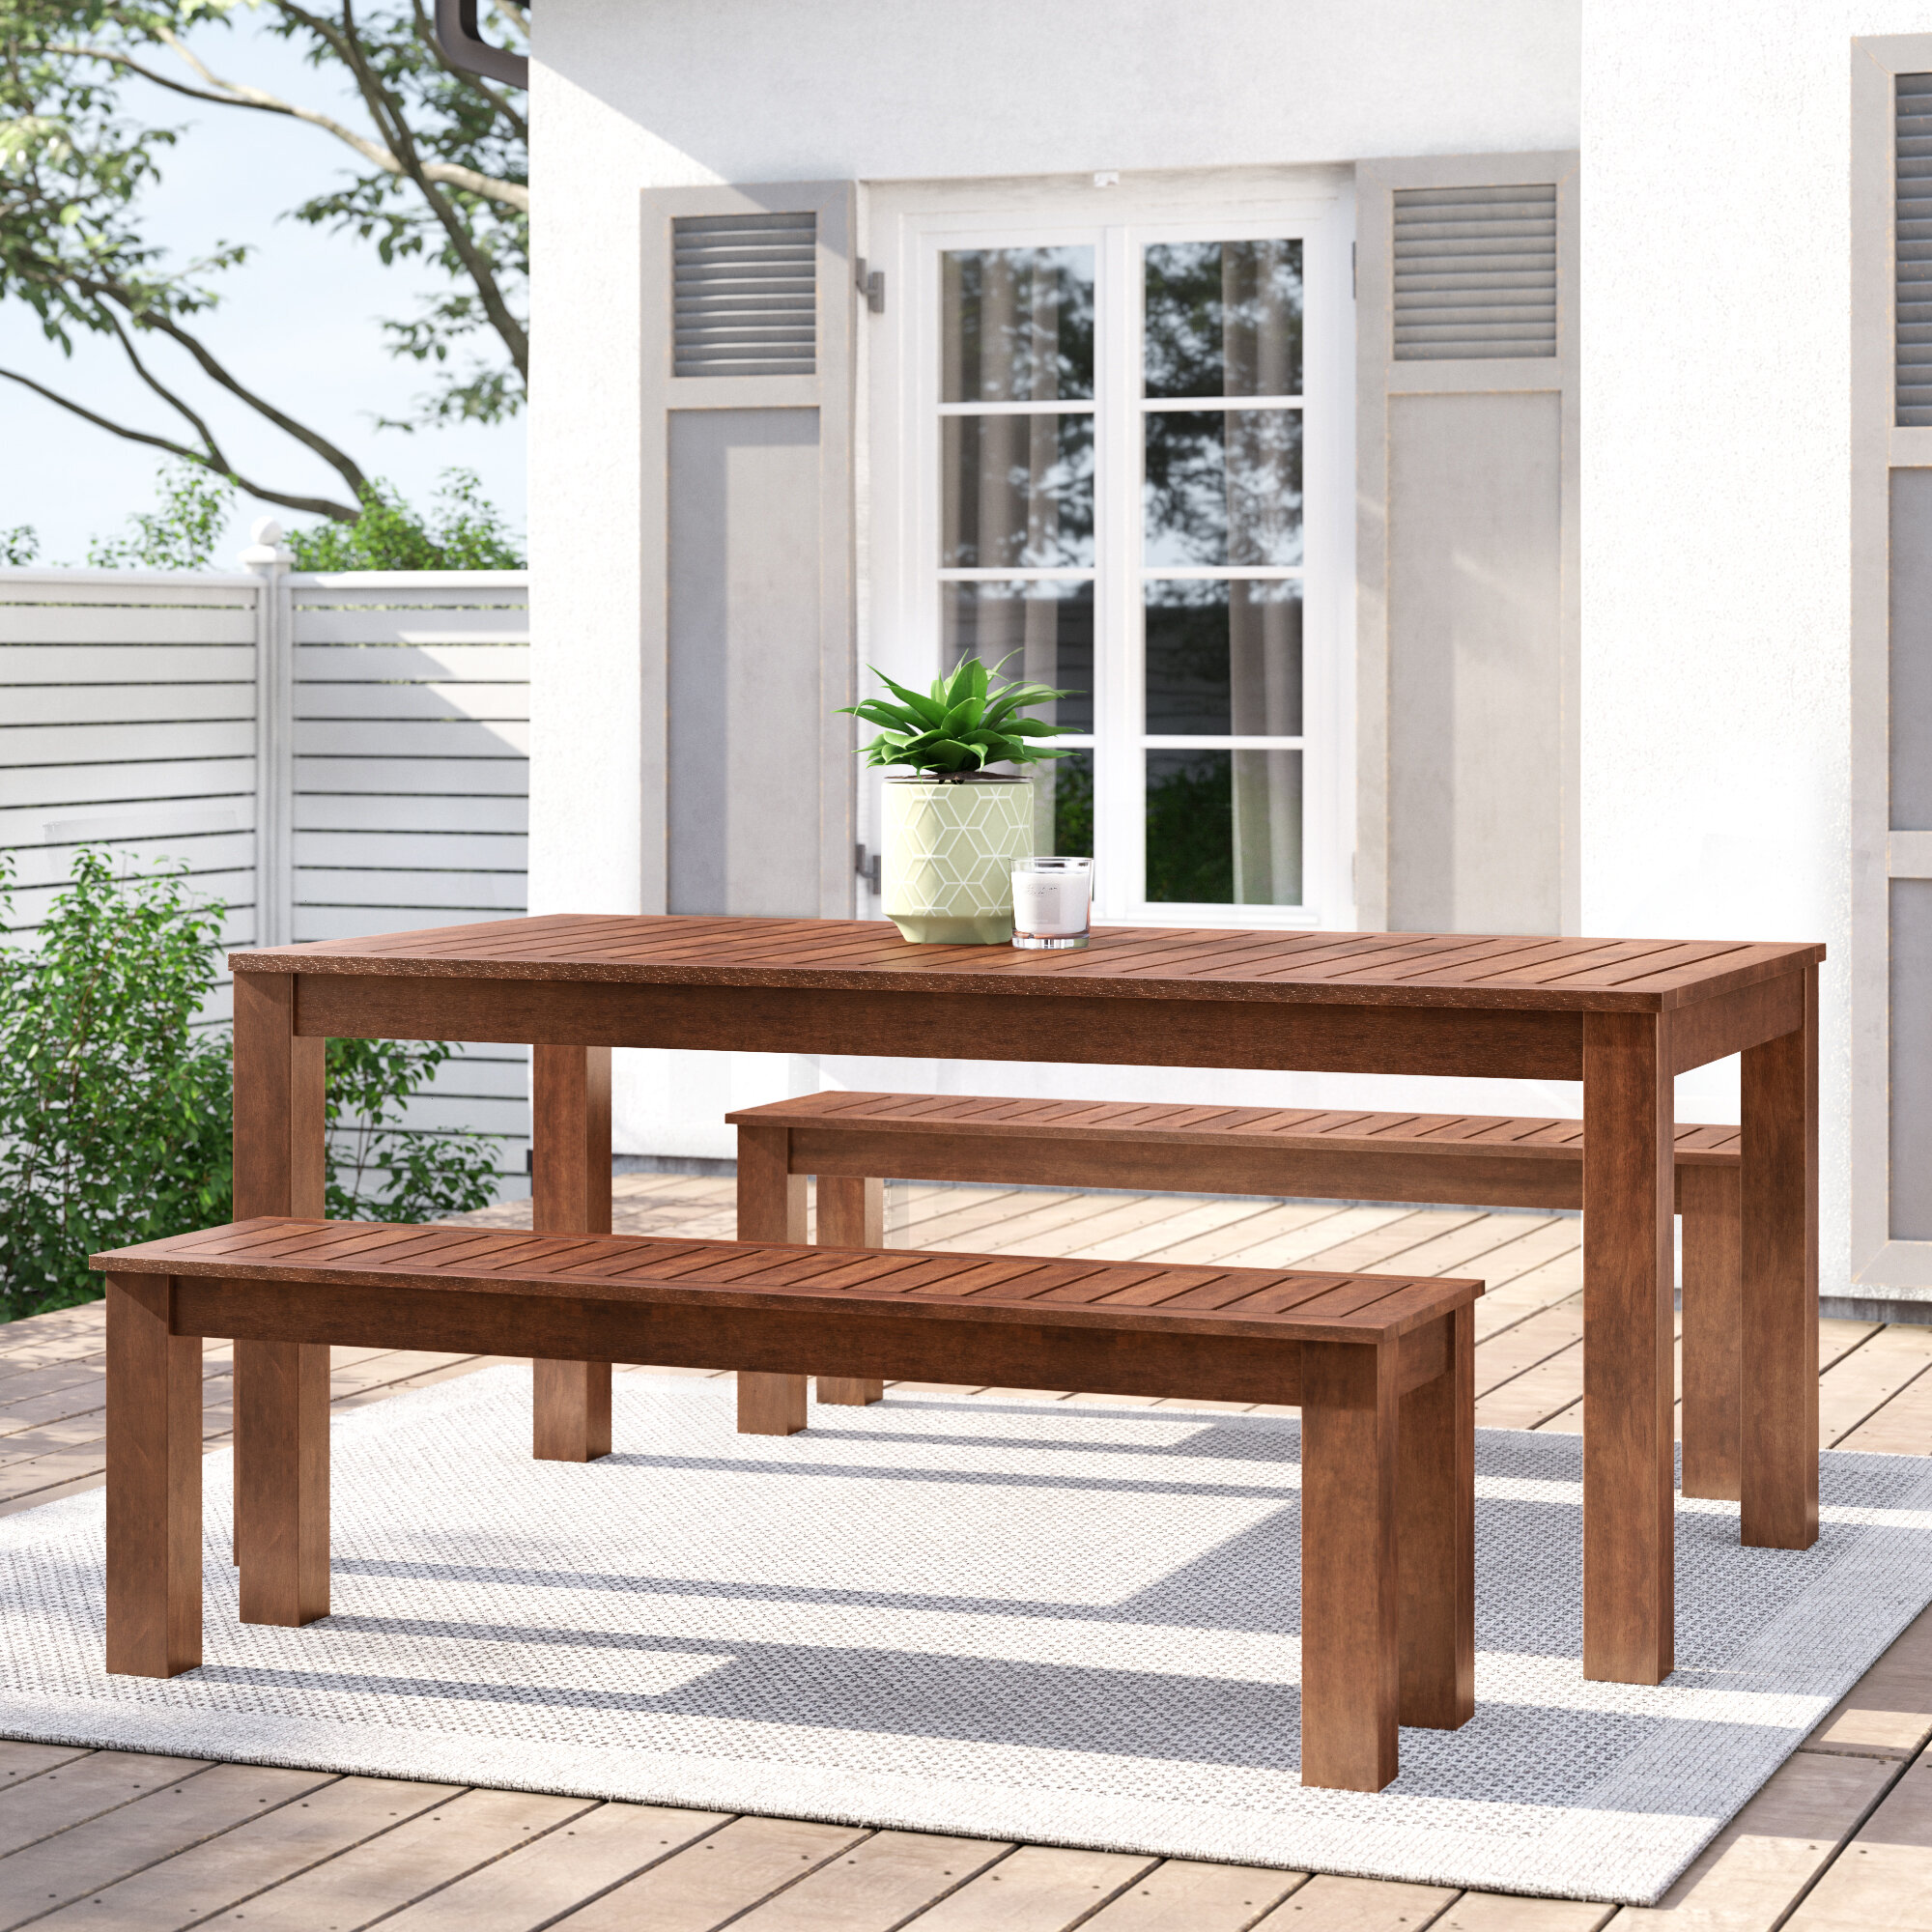 Tidyard Wooden Garden Table with Umbrella Hole Acacia Wood Outdoor Dining Table for Garden Deck,Terrace Outdoor Furniture 78.7 x 35.4 x 29.1 Inches L x W x H